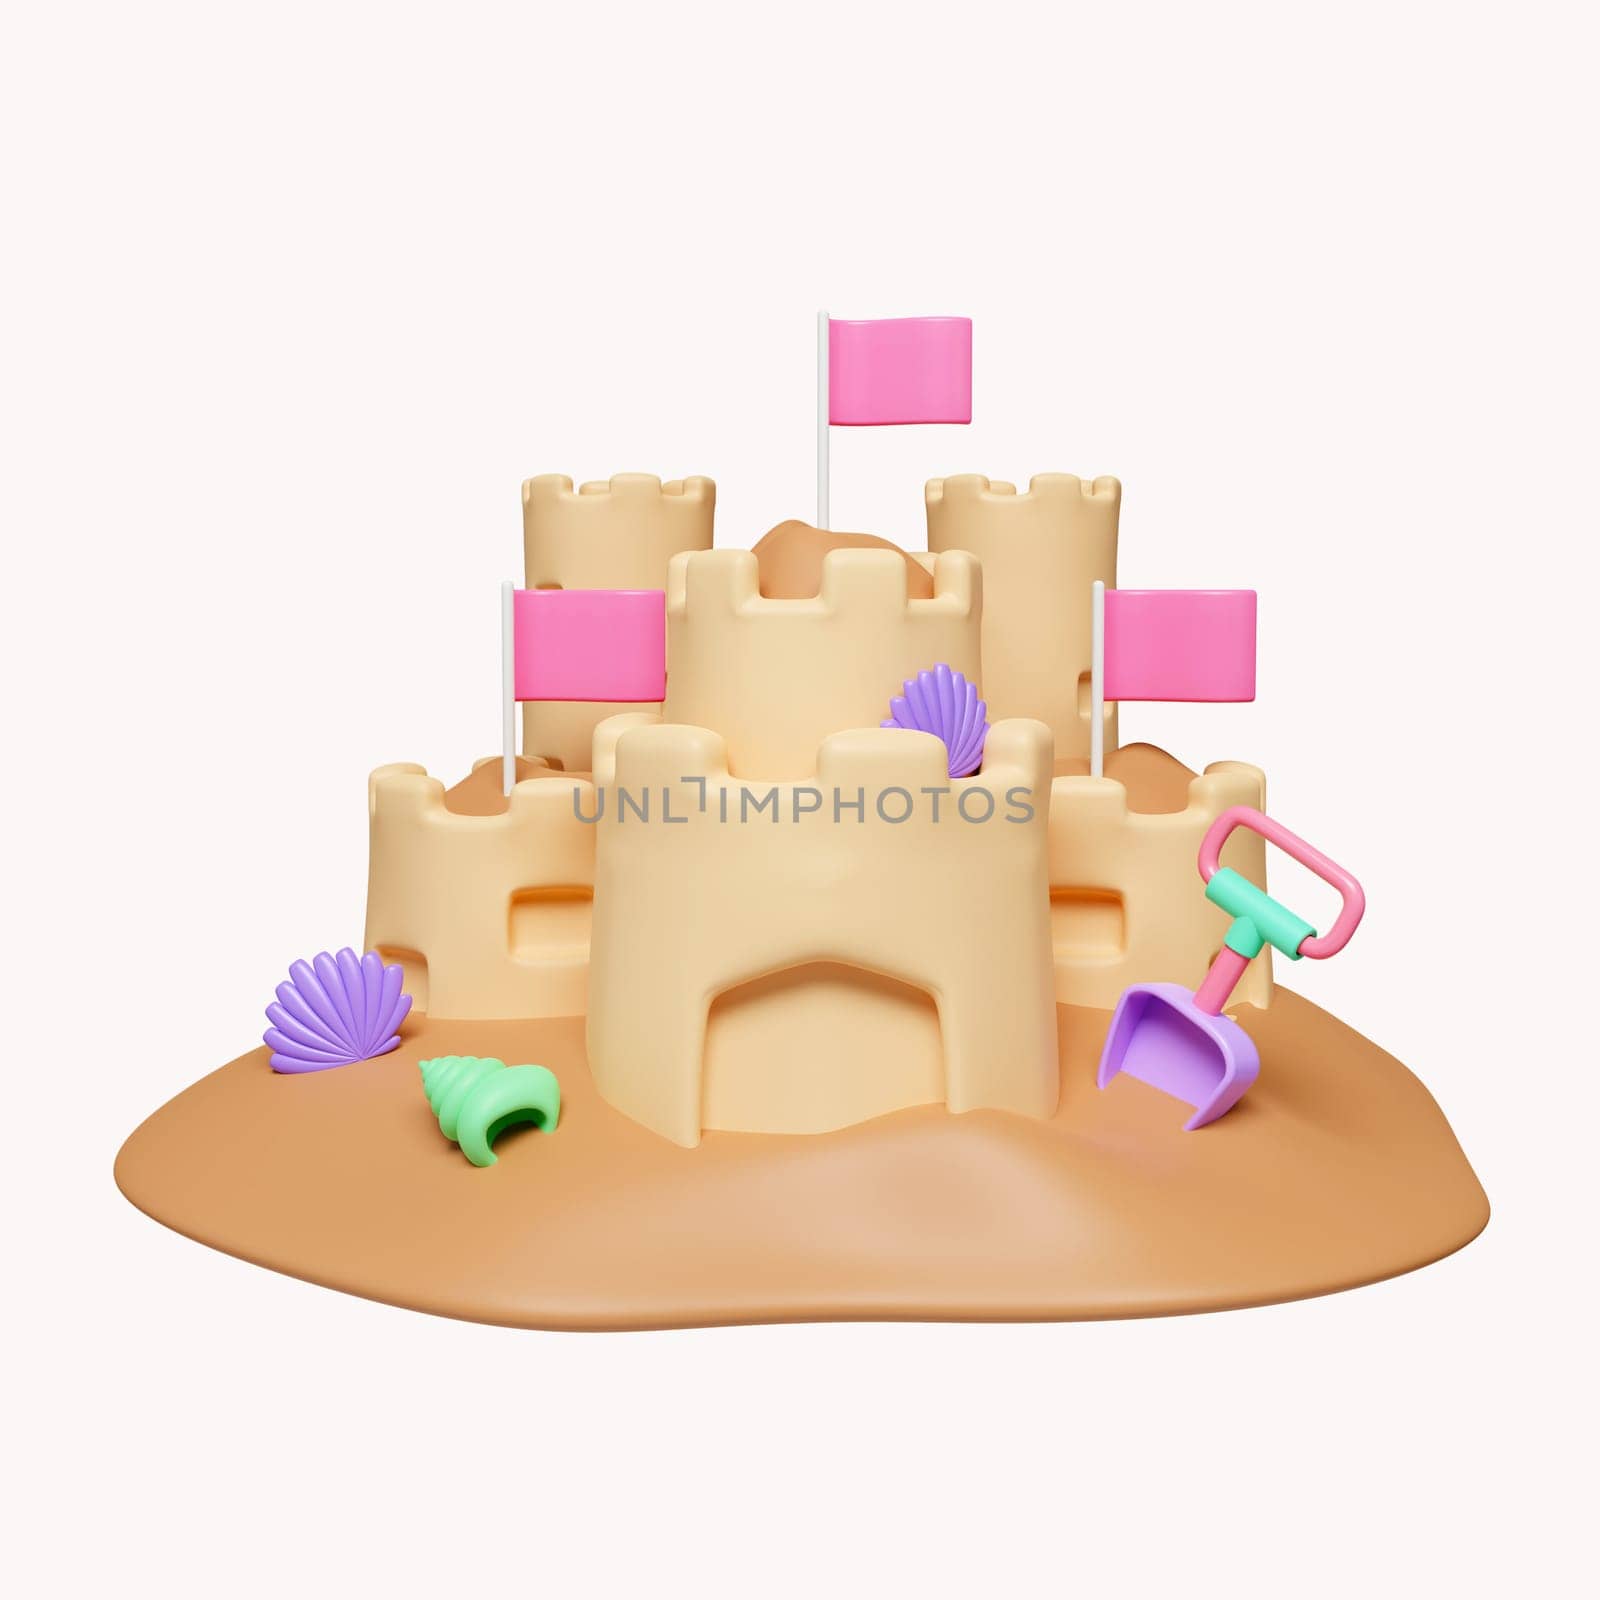 3d sand castle, fort or fortress with towers, shell and flags. summer vacation travel kids children leisure fun play. icon isolated on white background. 3d rendering illustration. Clipping path. by meepiangraphic